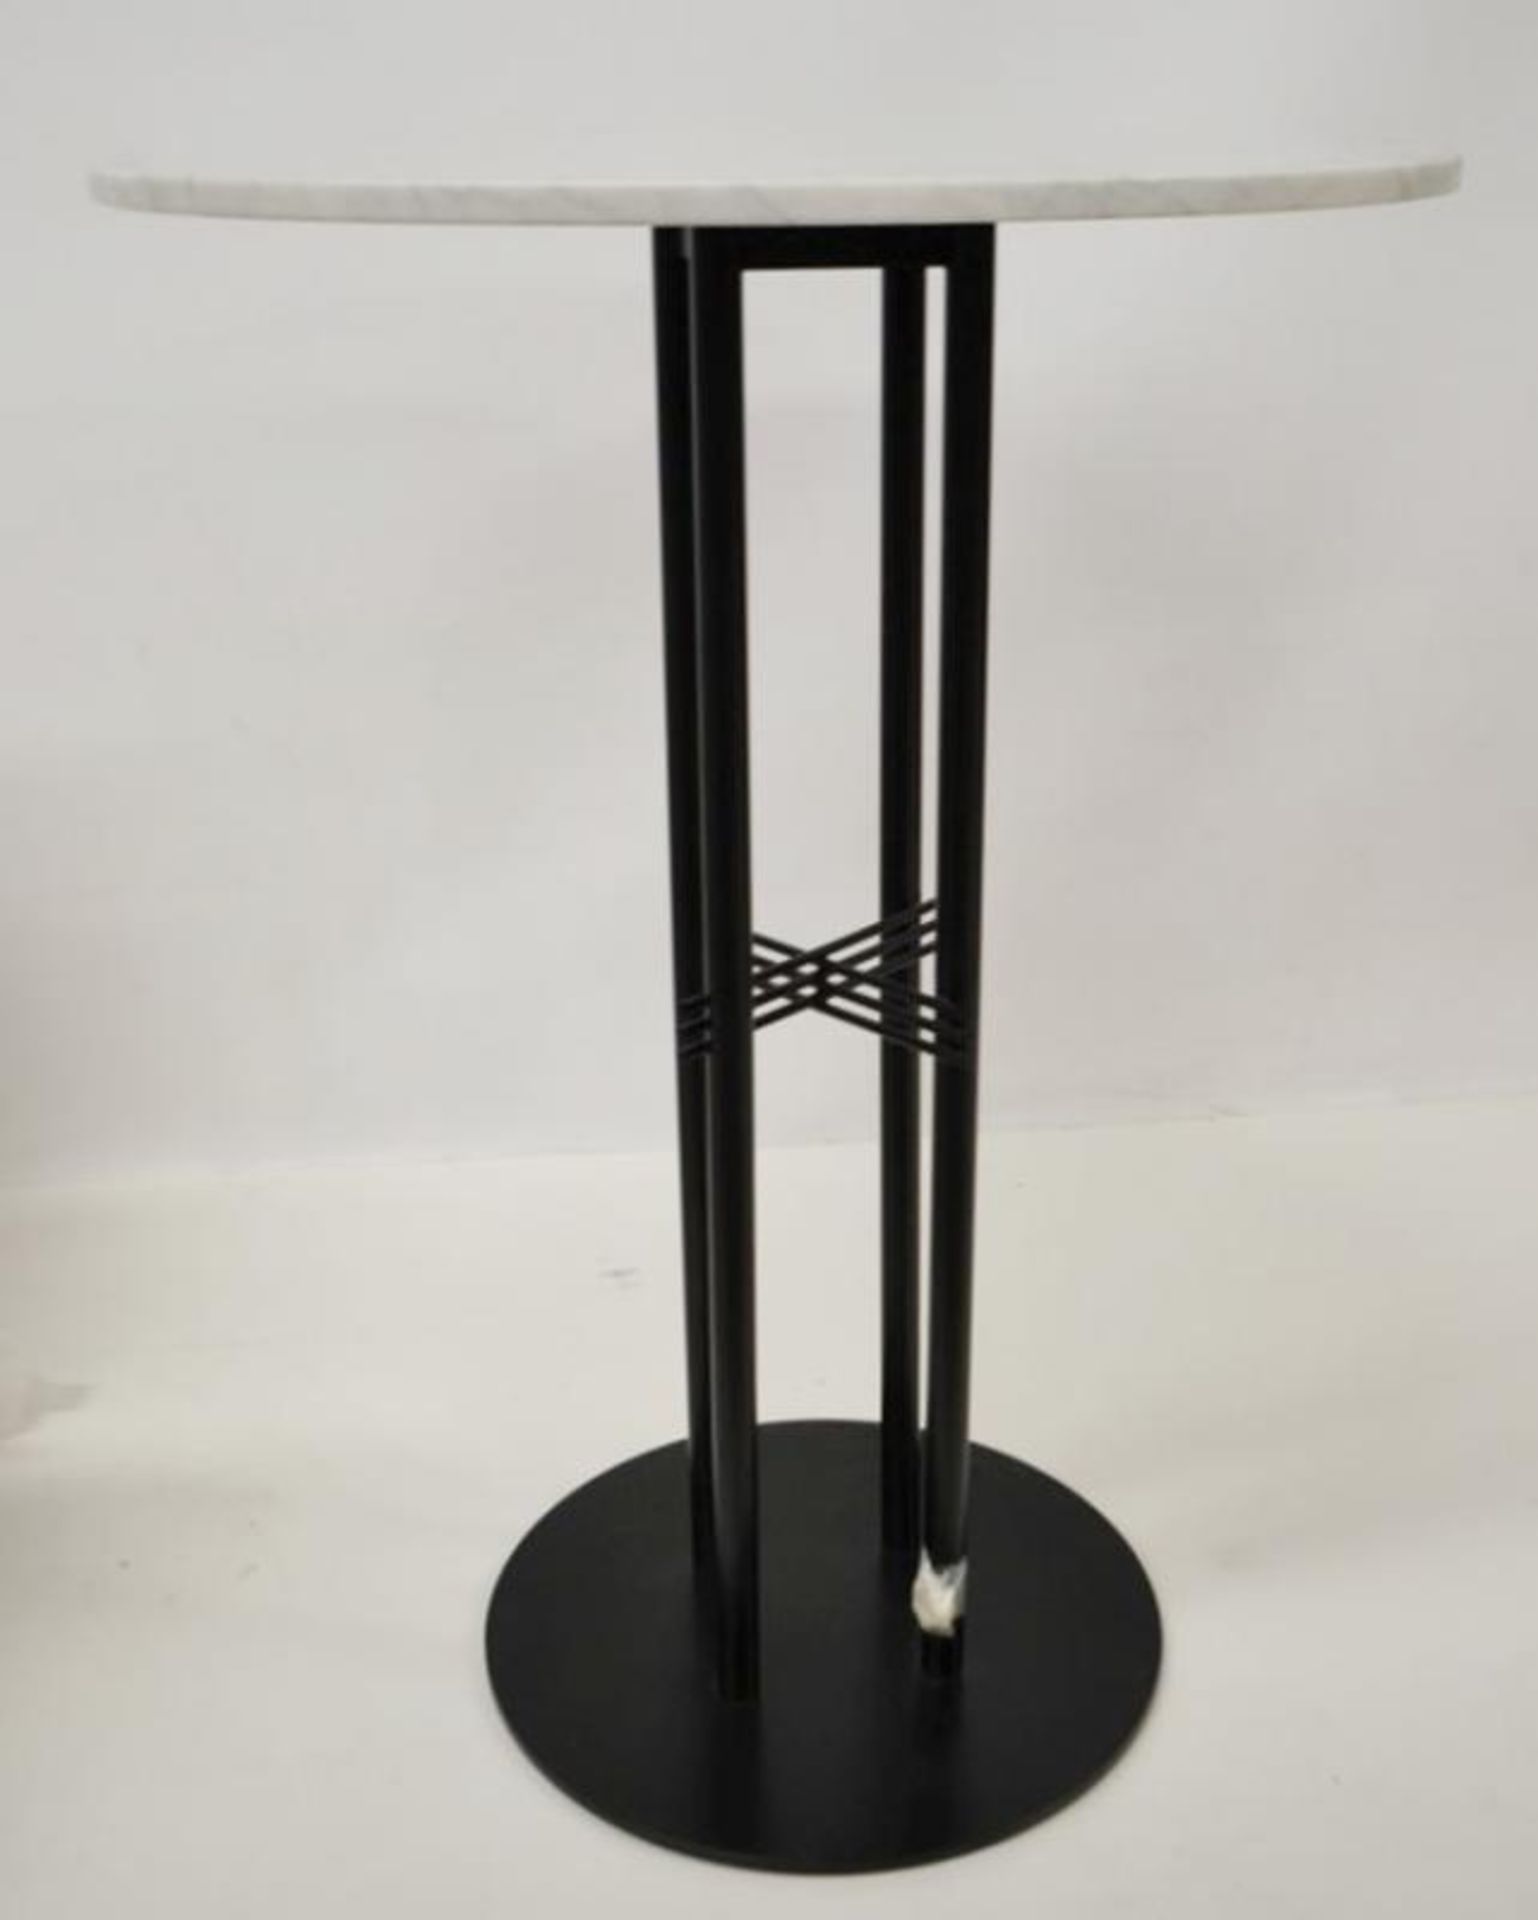 1 x GUBI 'TS Column' Designer Bar Table With A Carrera White Marble Top And Base - RRP £1,230.00 - Image 4 of 4